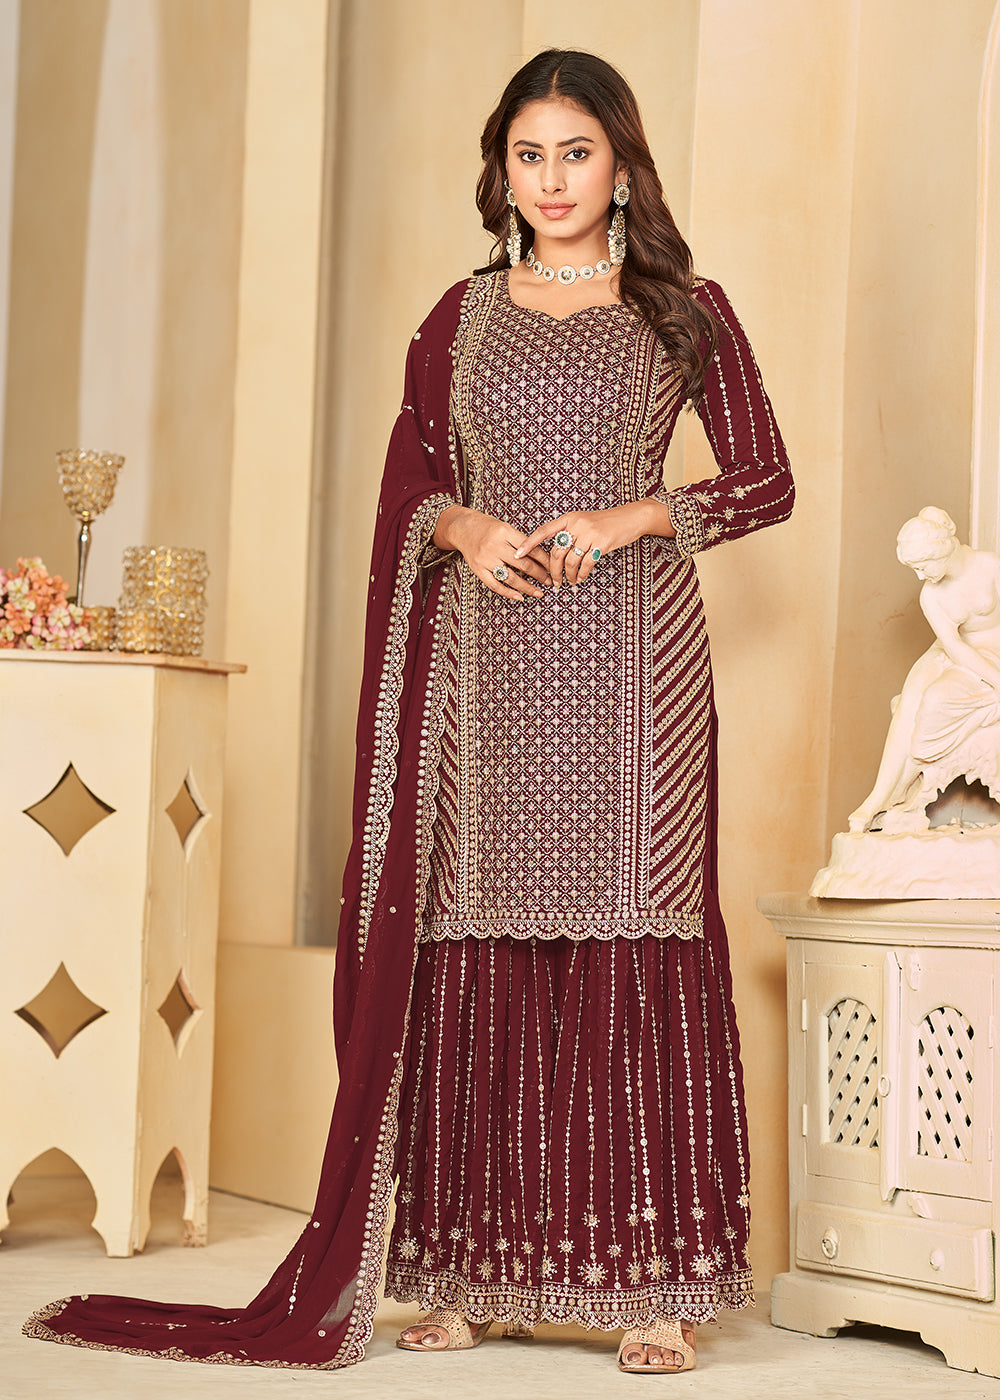 Fabulous Blooming Vichitra Embroidery Work Party Wear Salwar Suit Maroon  Color DN 118